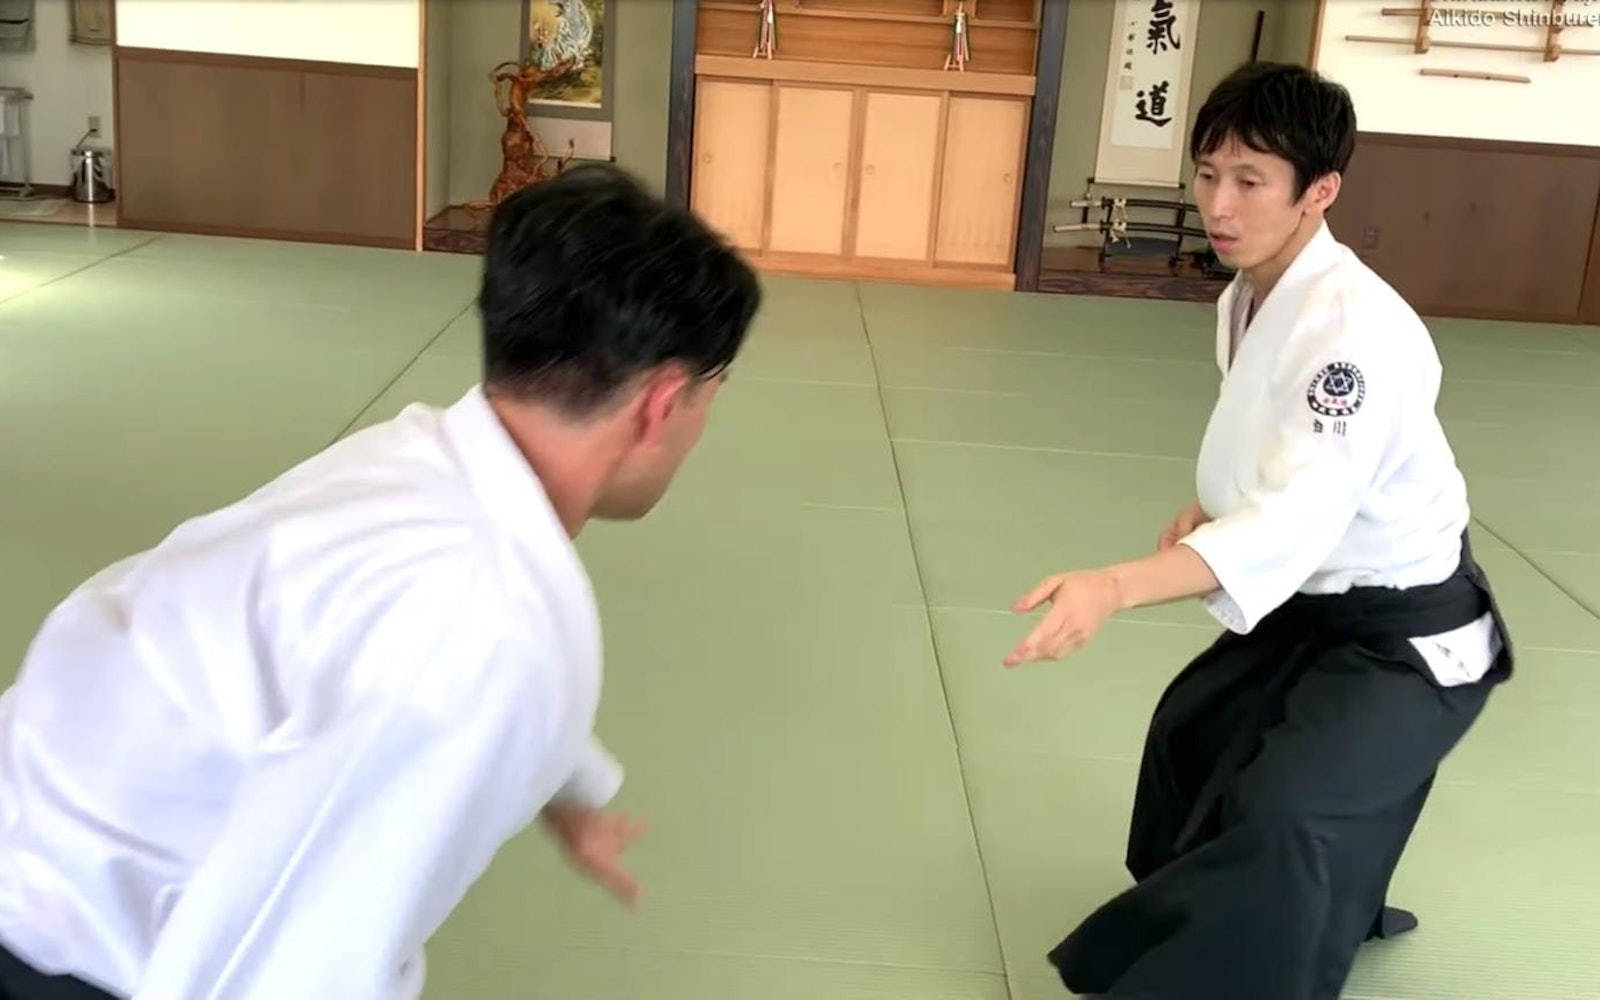 Masterful Aikidokas Displaying Defensive Stance in Aikido Practice Wallpaper